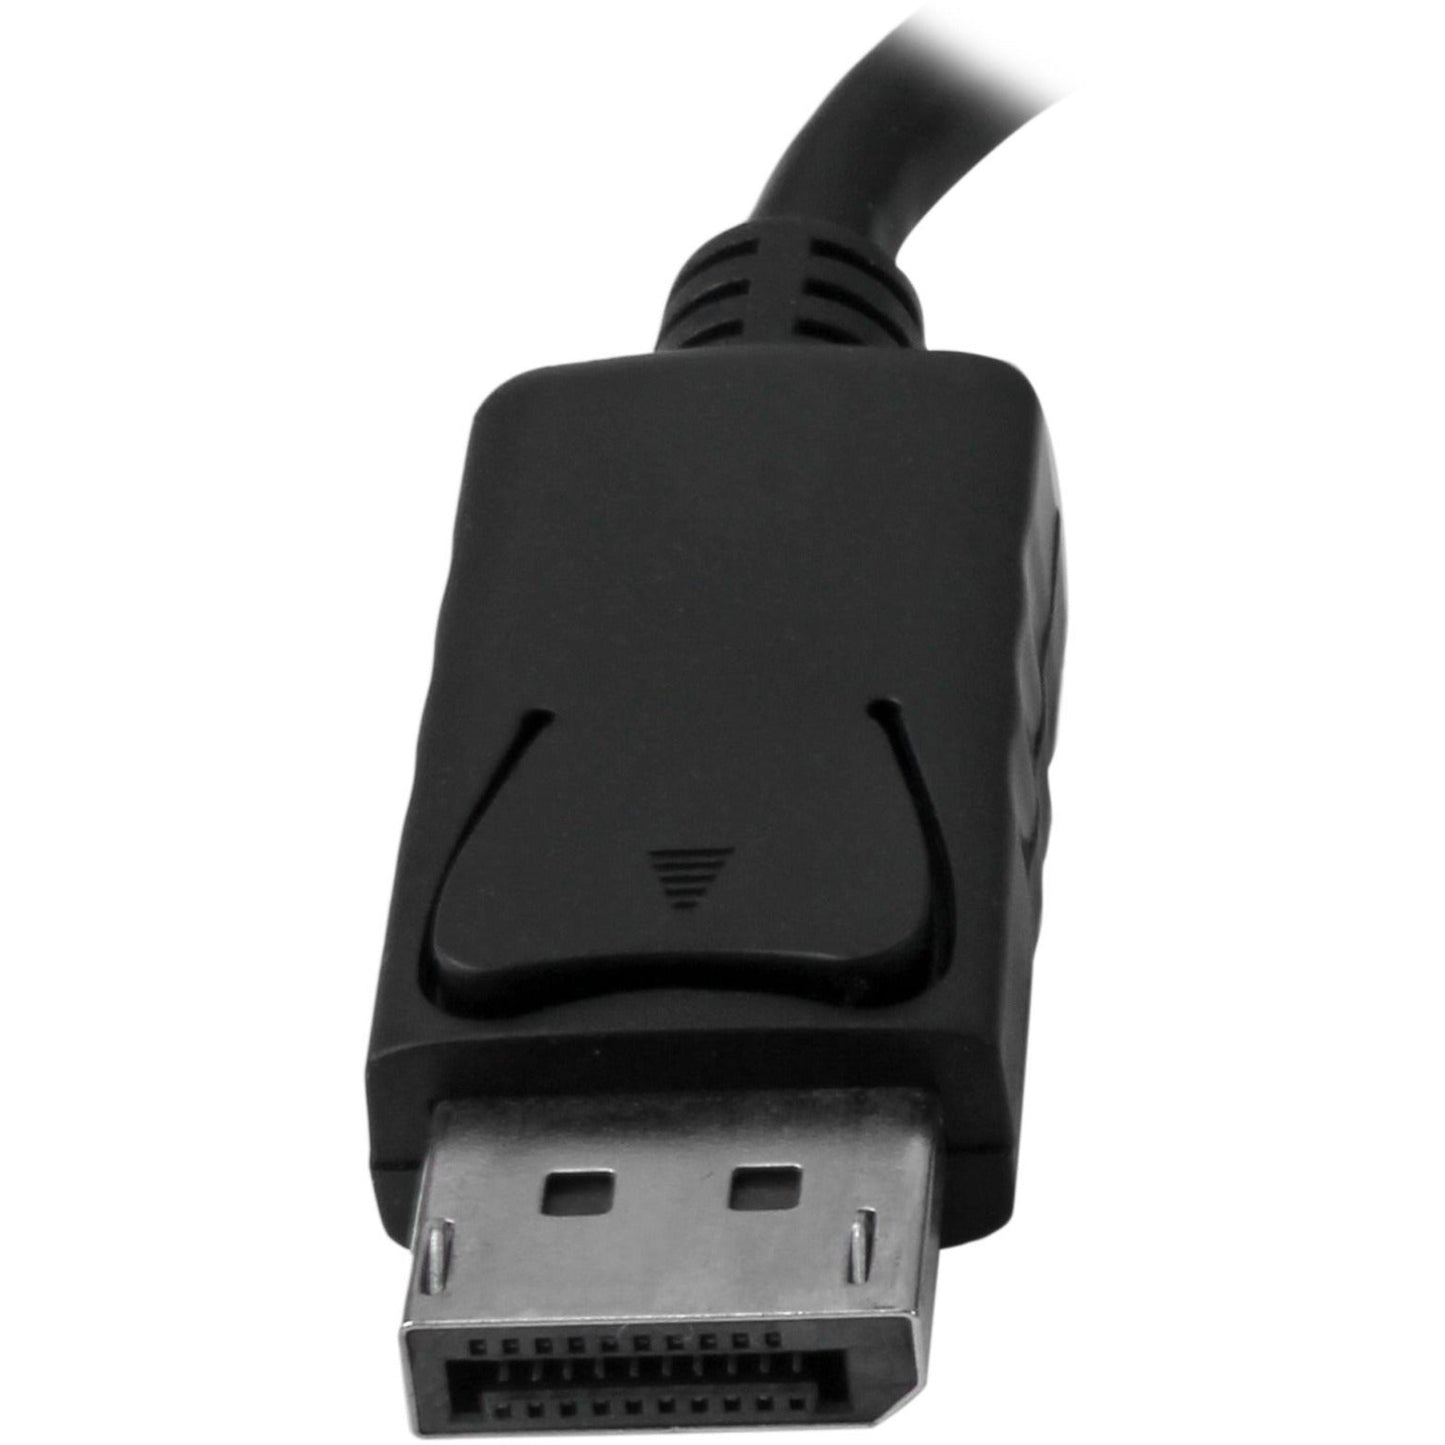 StarTech.com Travel A/V Adapter: 2-in-1 DisplayPort to HDMI or VGA